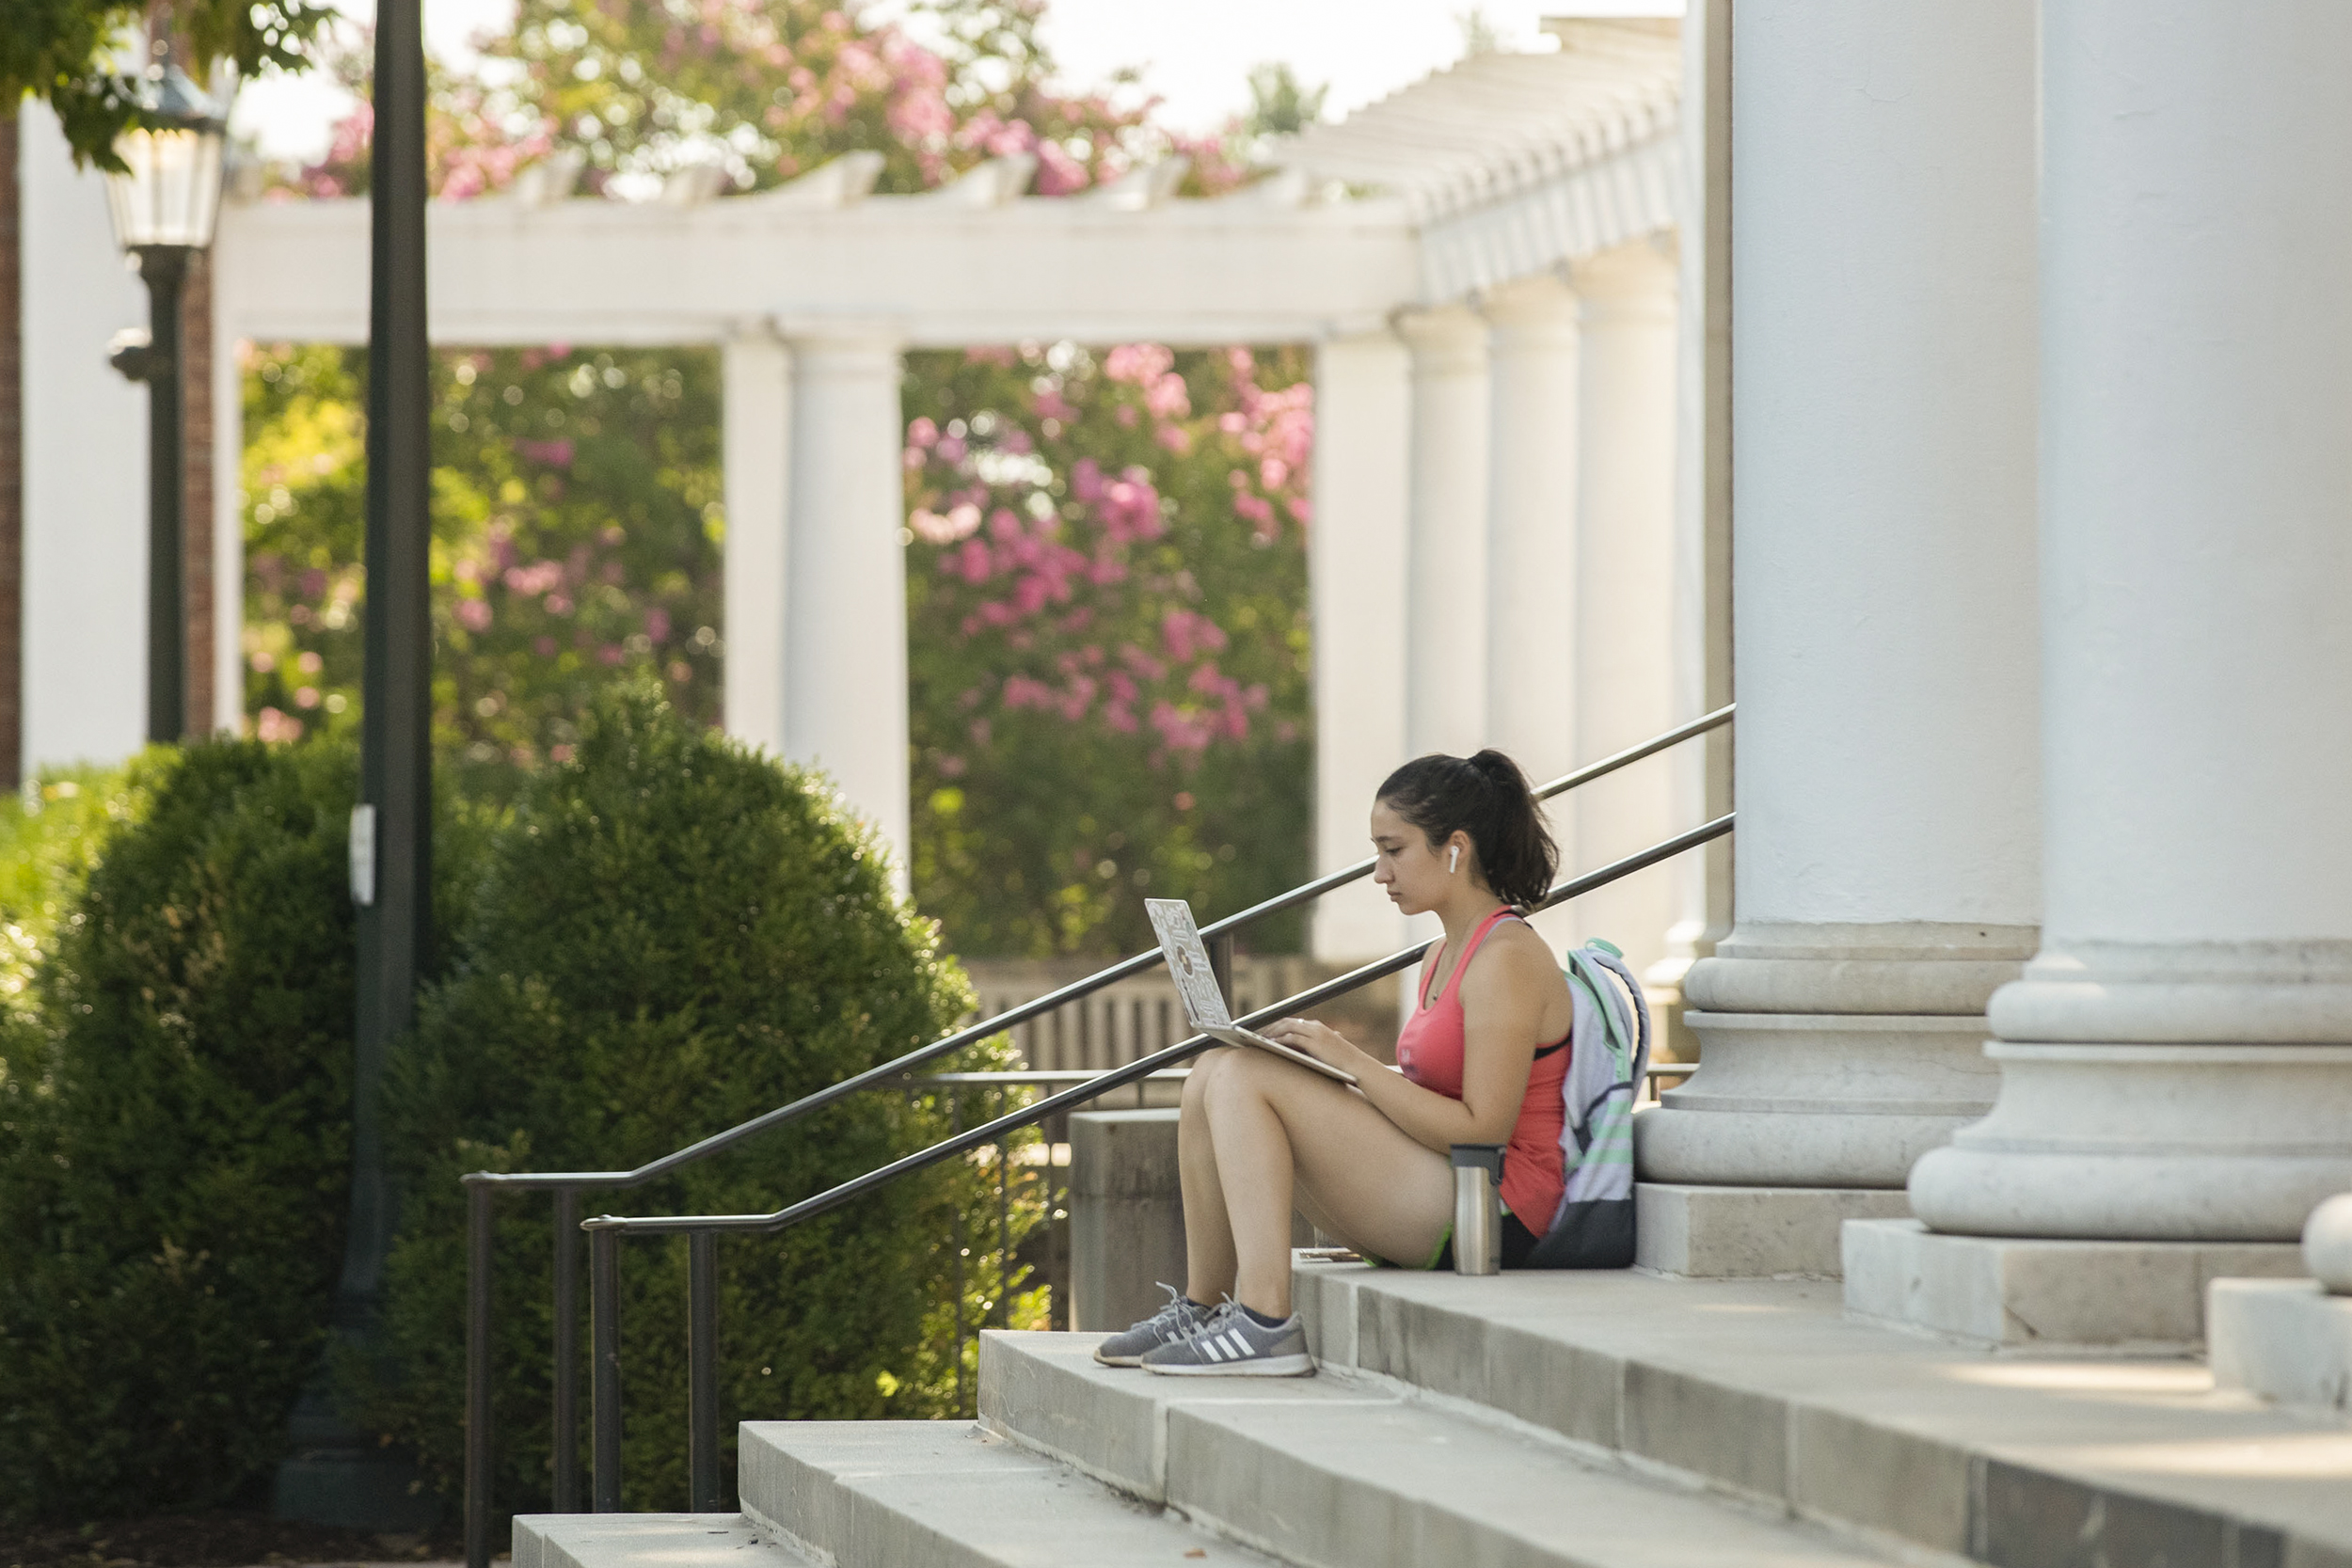 Student sitting on the steps at the base of a column working on their laptop